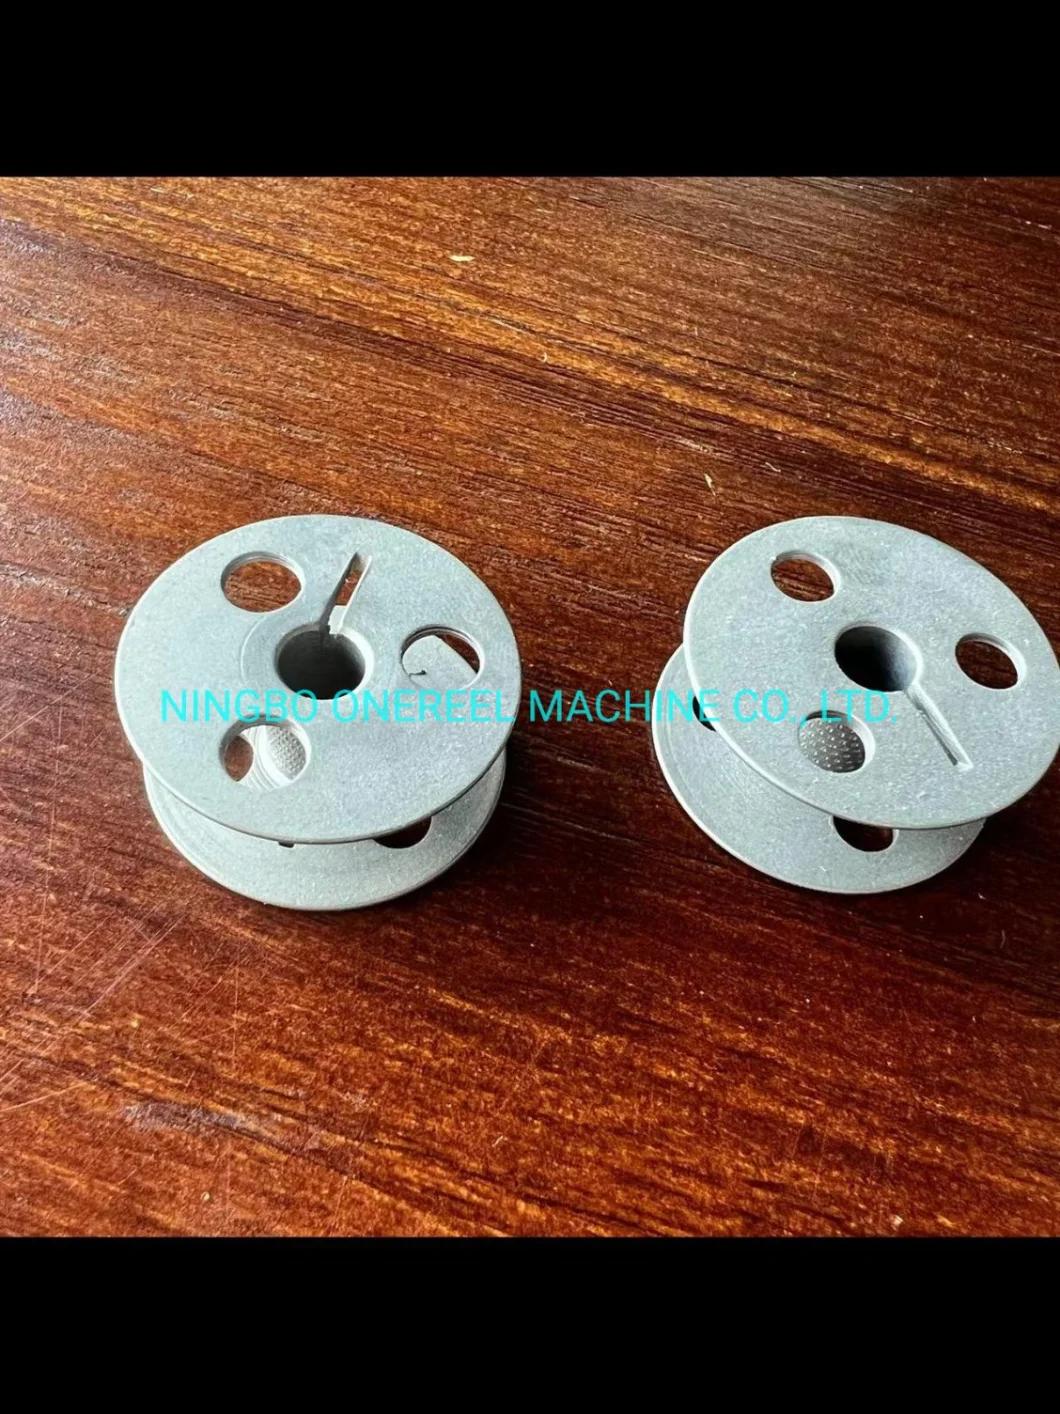 Sewing Accessory Sewing Machine Parts Steel Reel